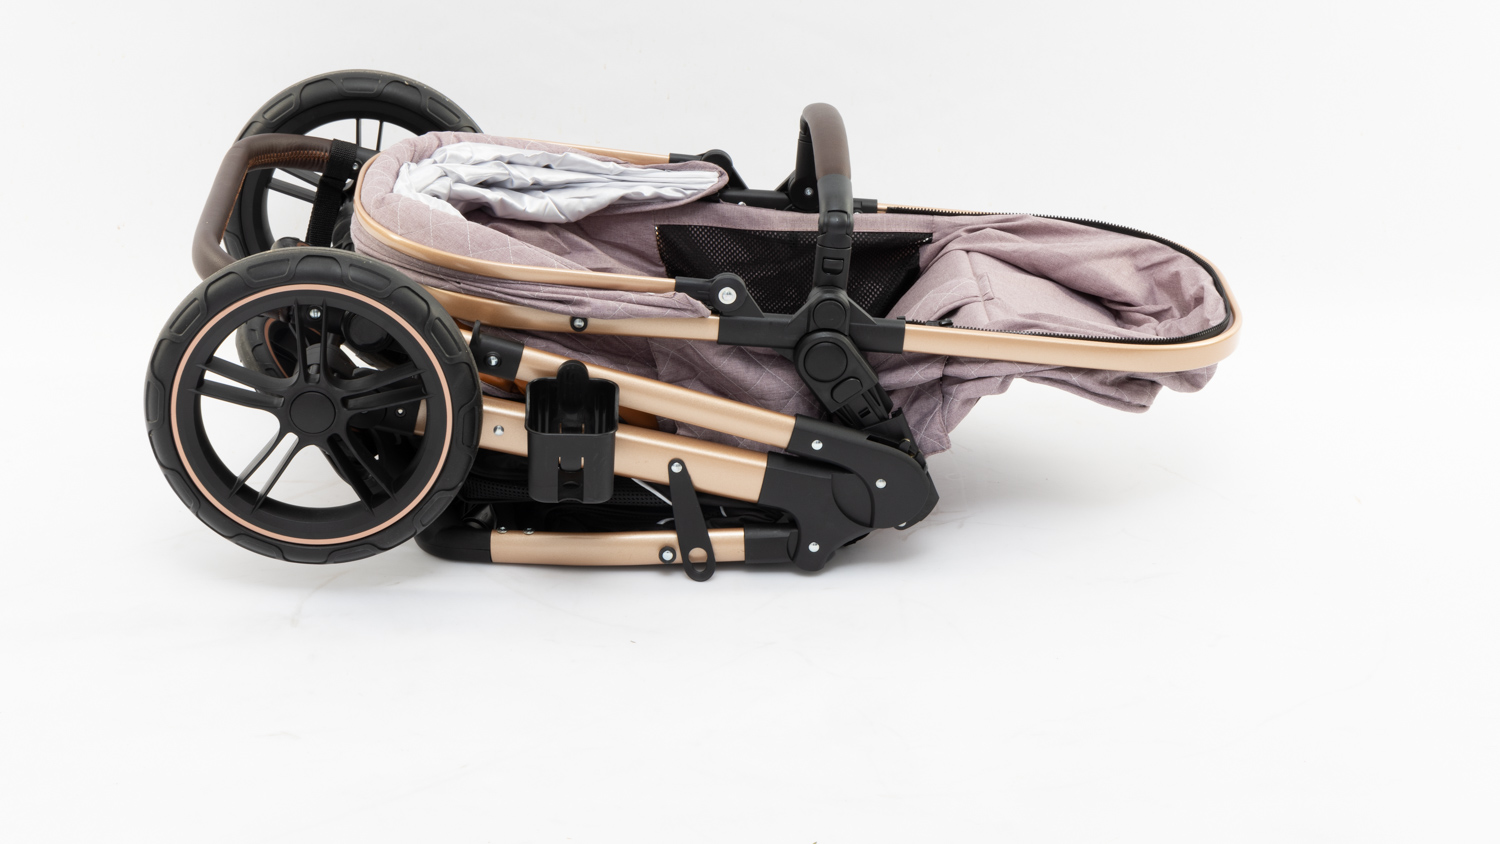 Belecoo X1 Review | Pram and stroller | CHOICE